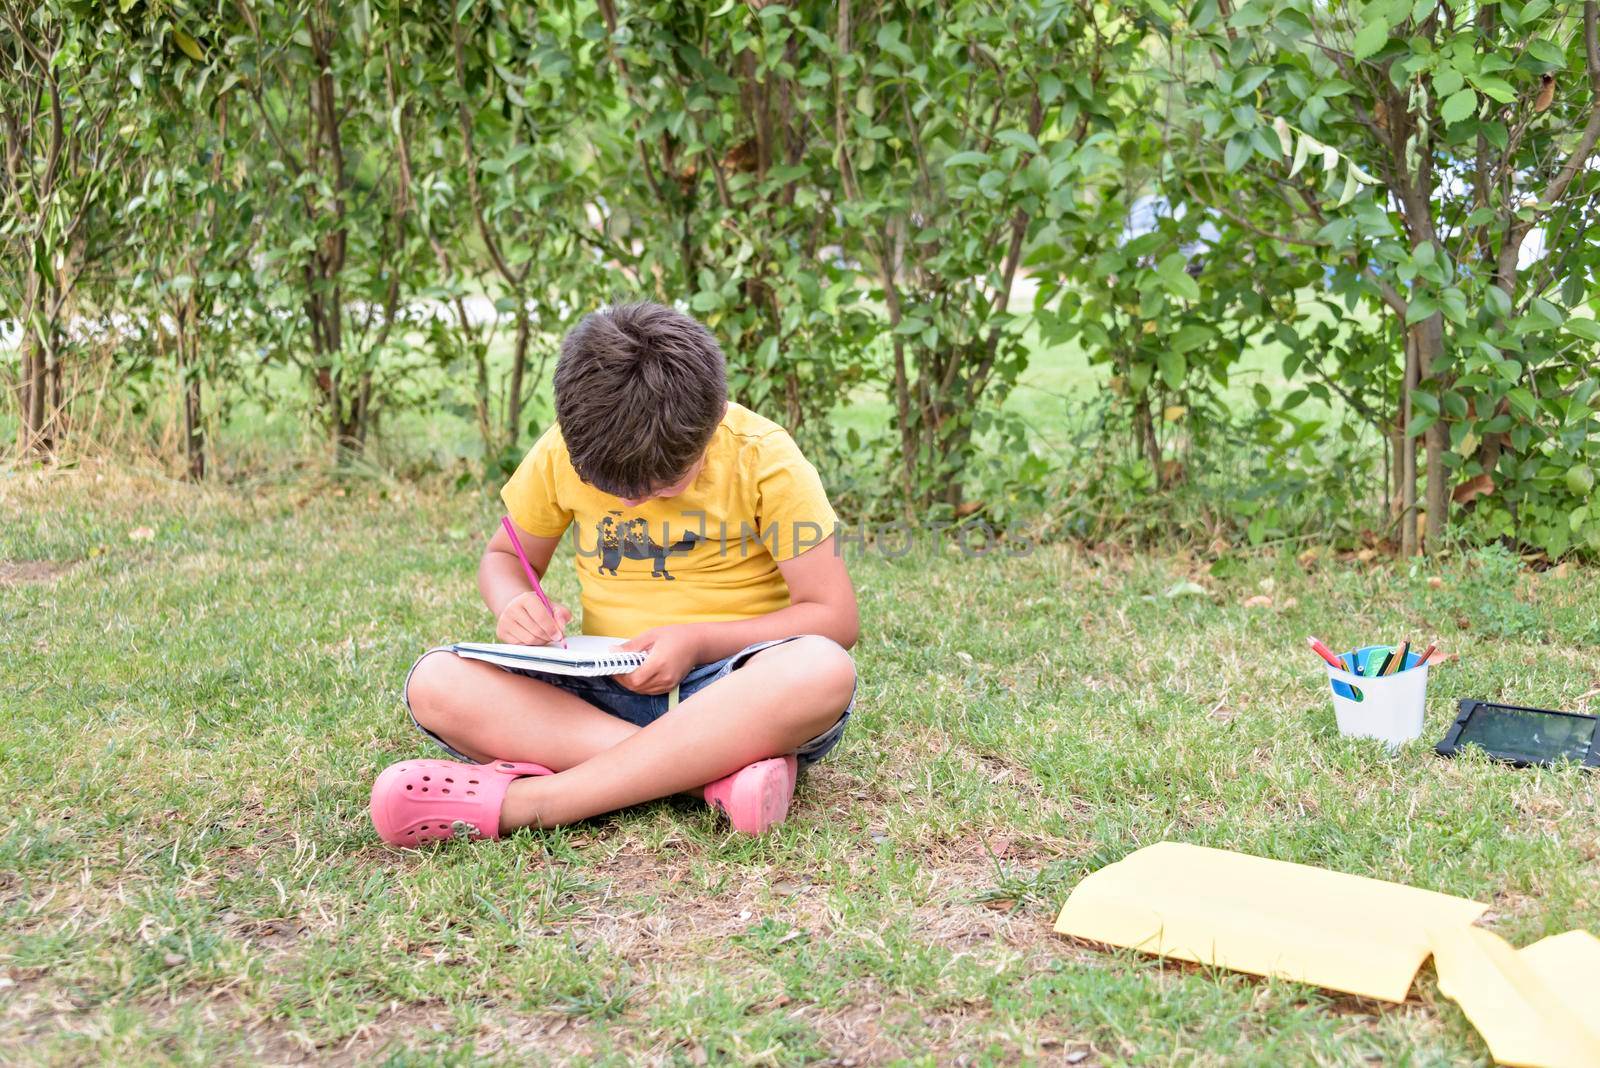 Young boy outdoors on the grass at backyard using his tablet computer. Educating and playing